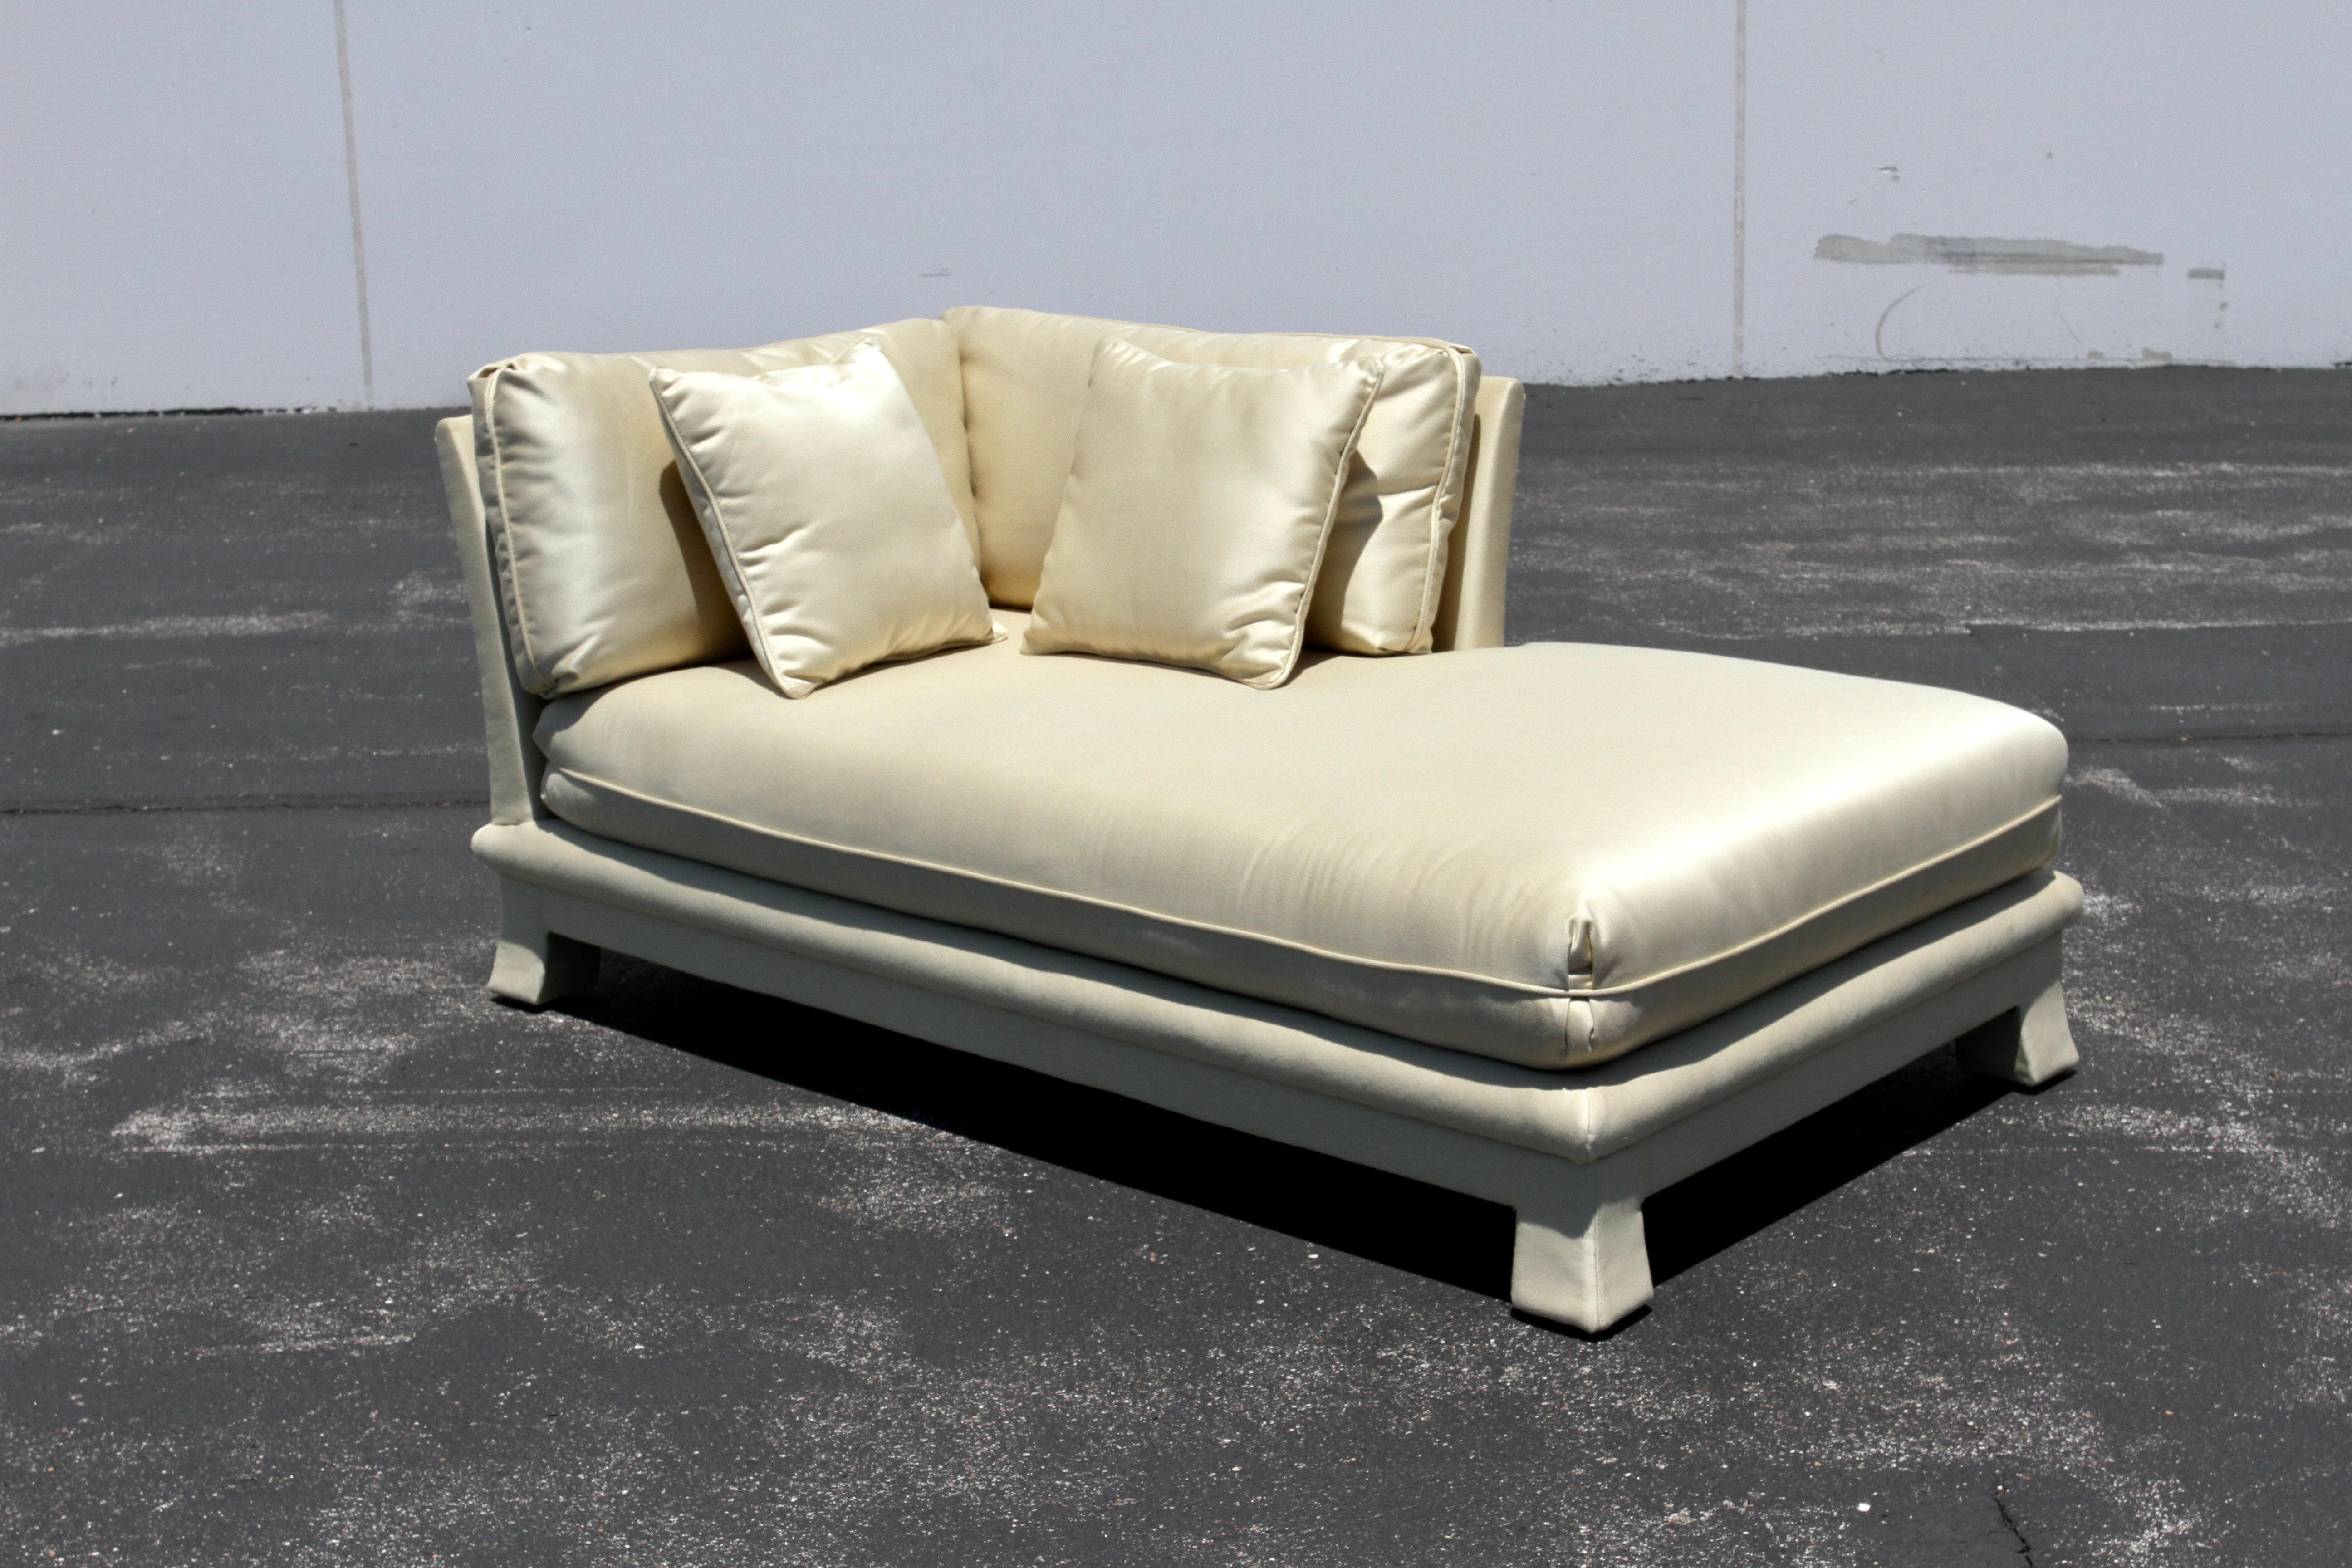 Hollywood Regency 1970s Karl Springer Style Chaise Lounge Sofa by Bernhardt Flair in Golden Silk For Sale